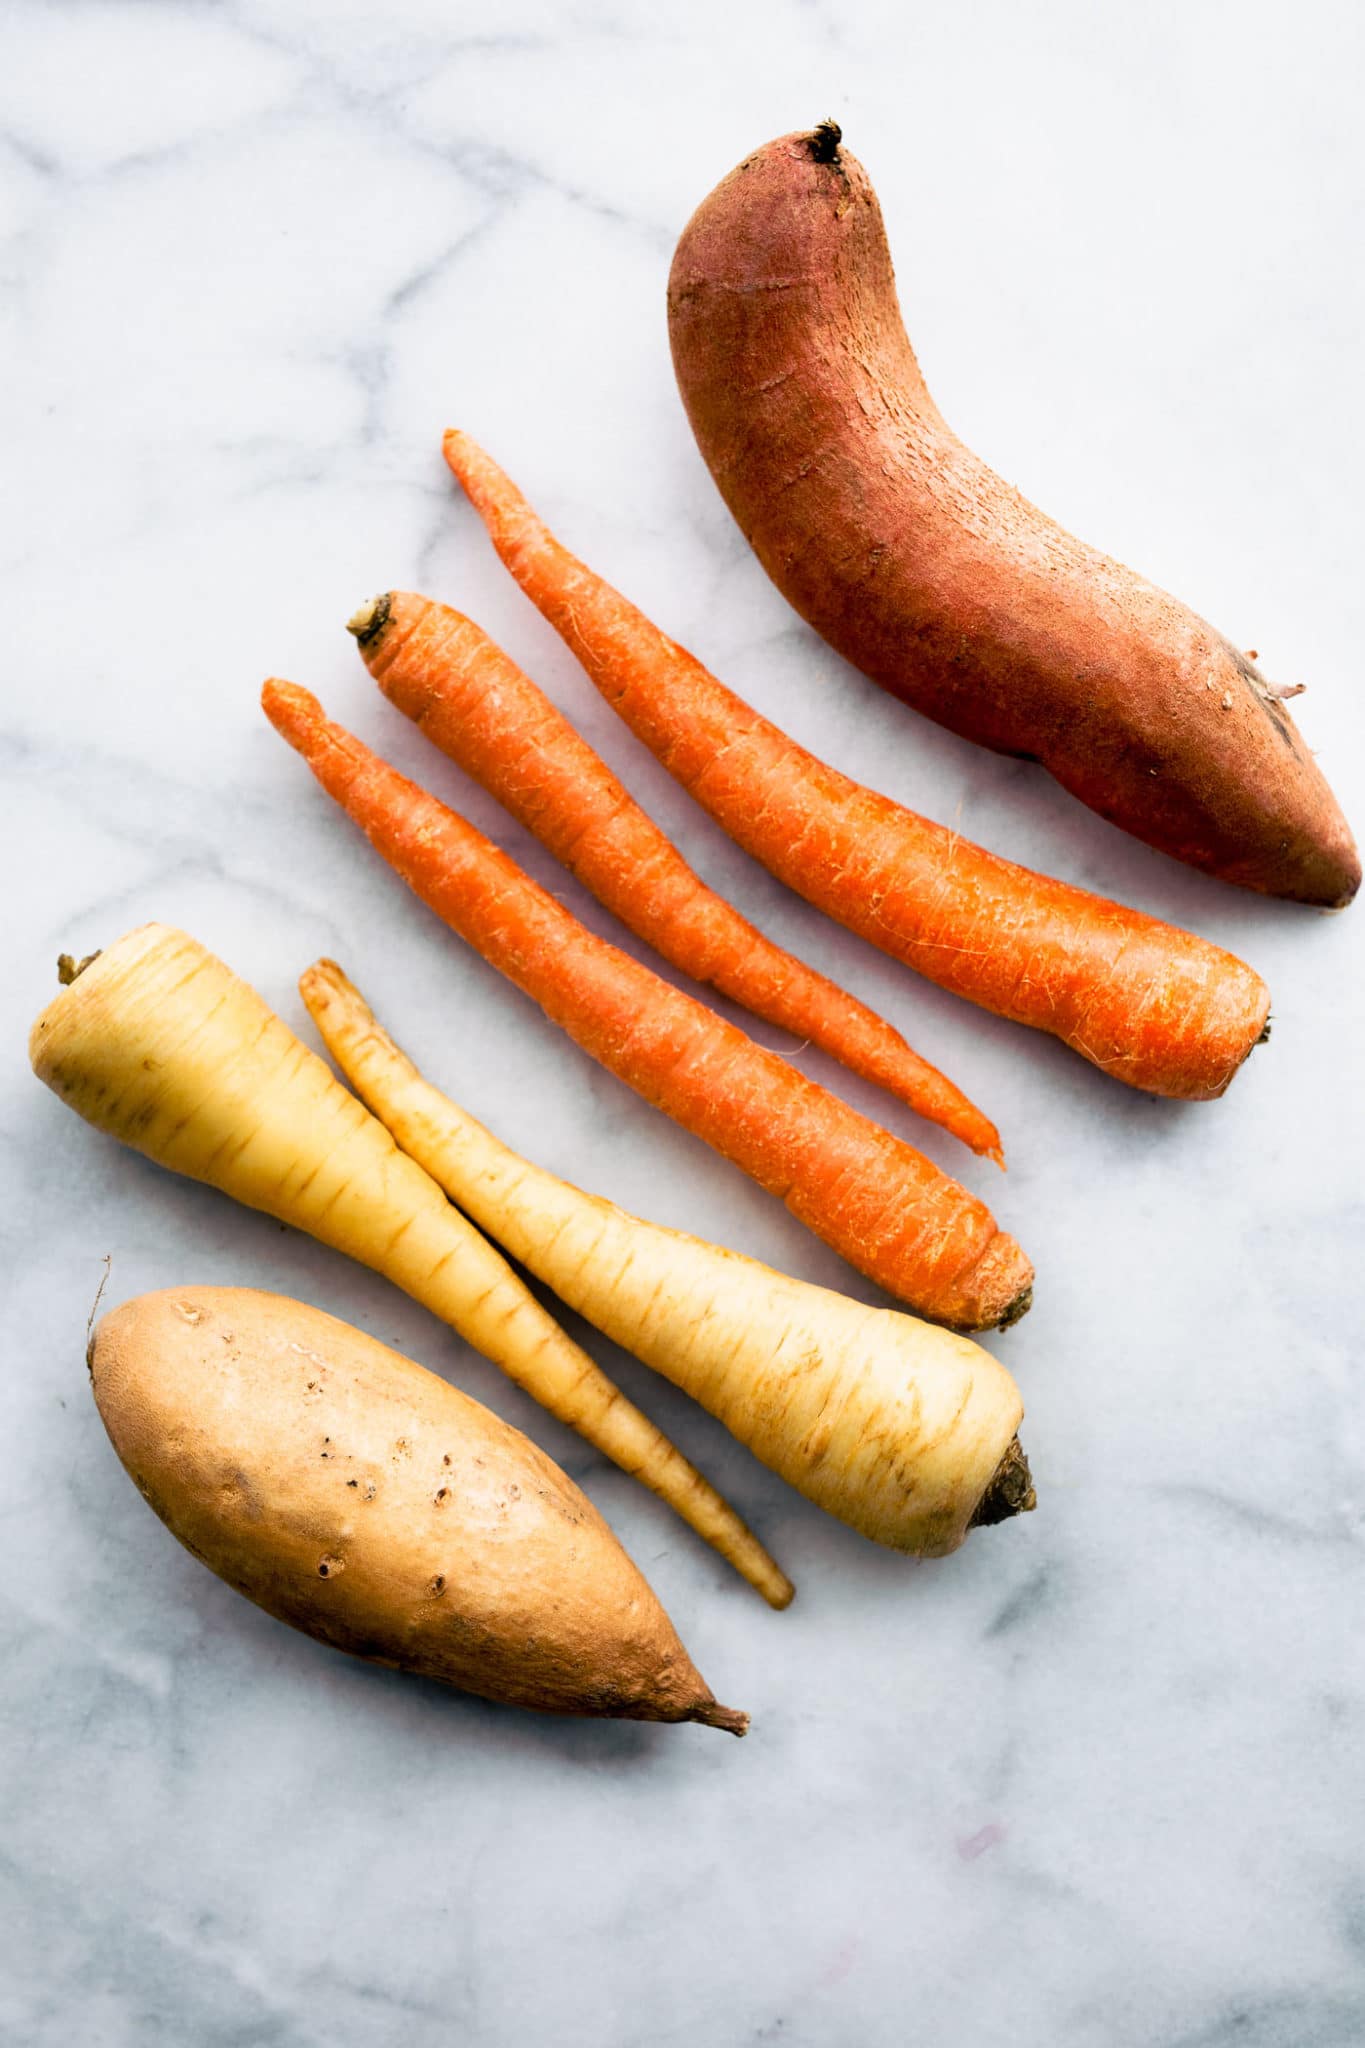 a sweet potato, three carrots, two parsnips, and a yam